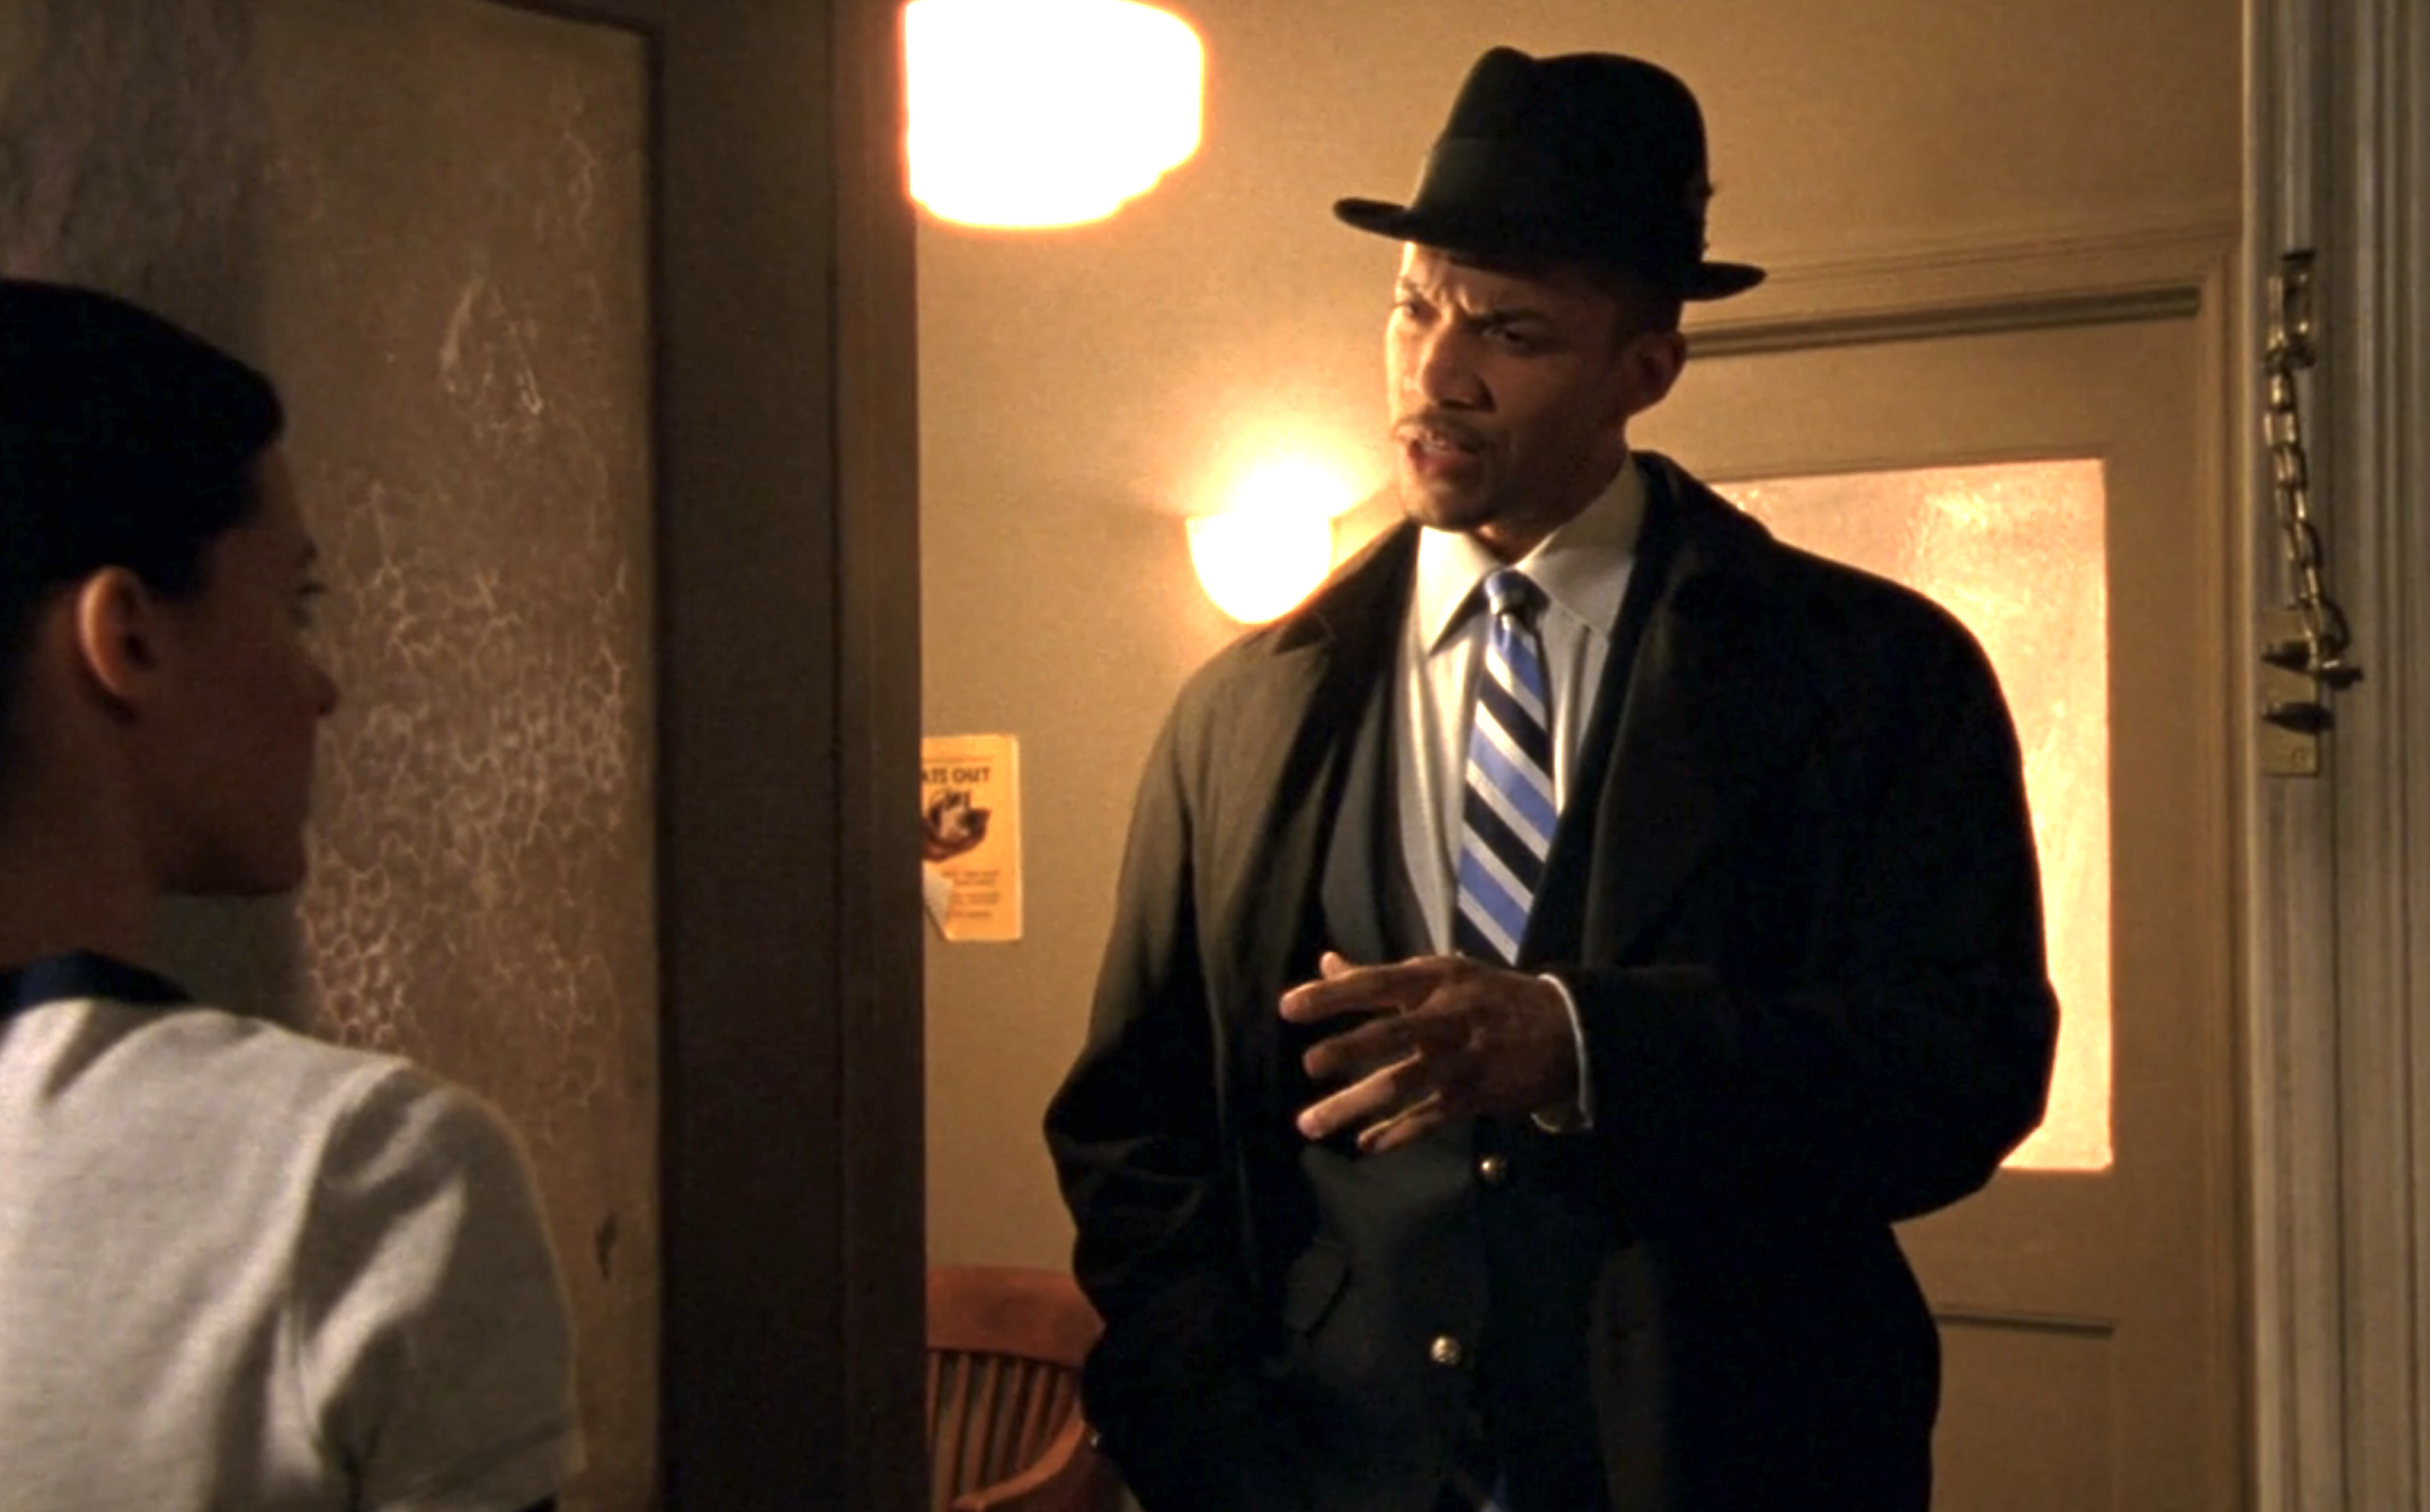 Screenshot from S1E17 of Veronica Mars. Clarence Wiedman is in a doorway talking to a young woman. He's wearing a dark suit, dark coat, and black fedora